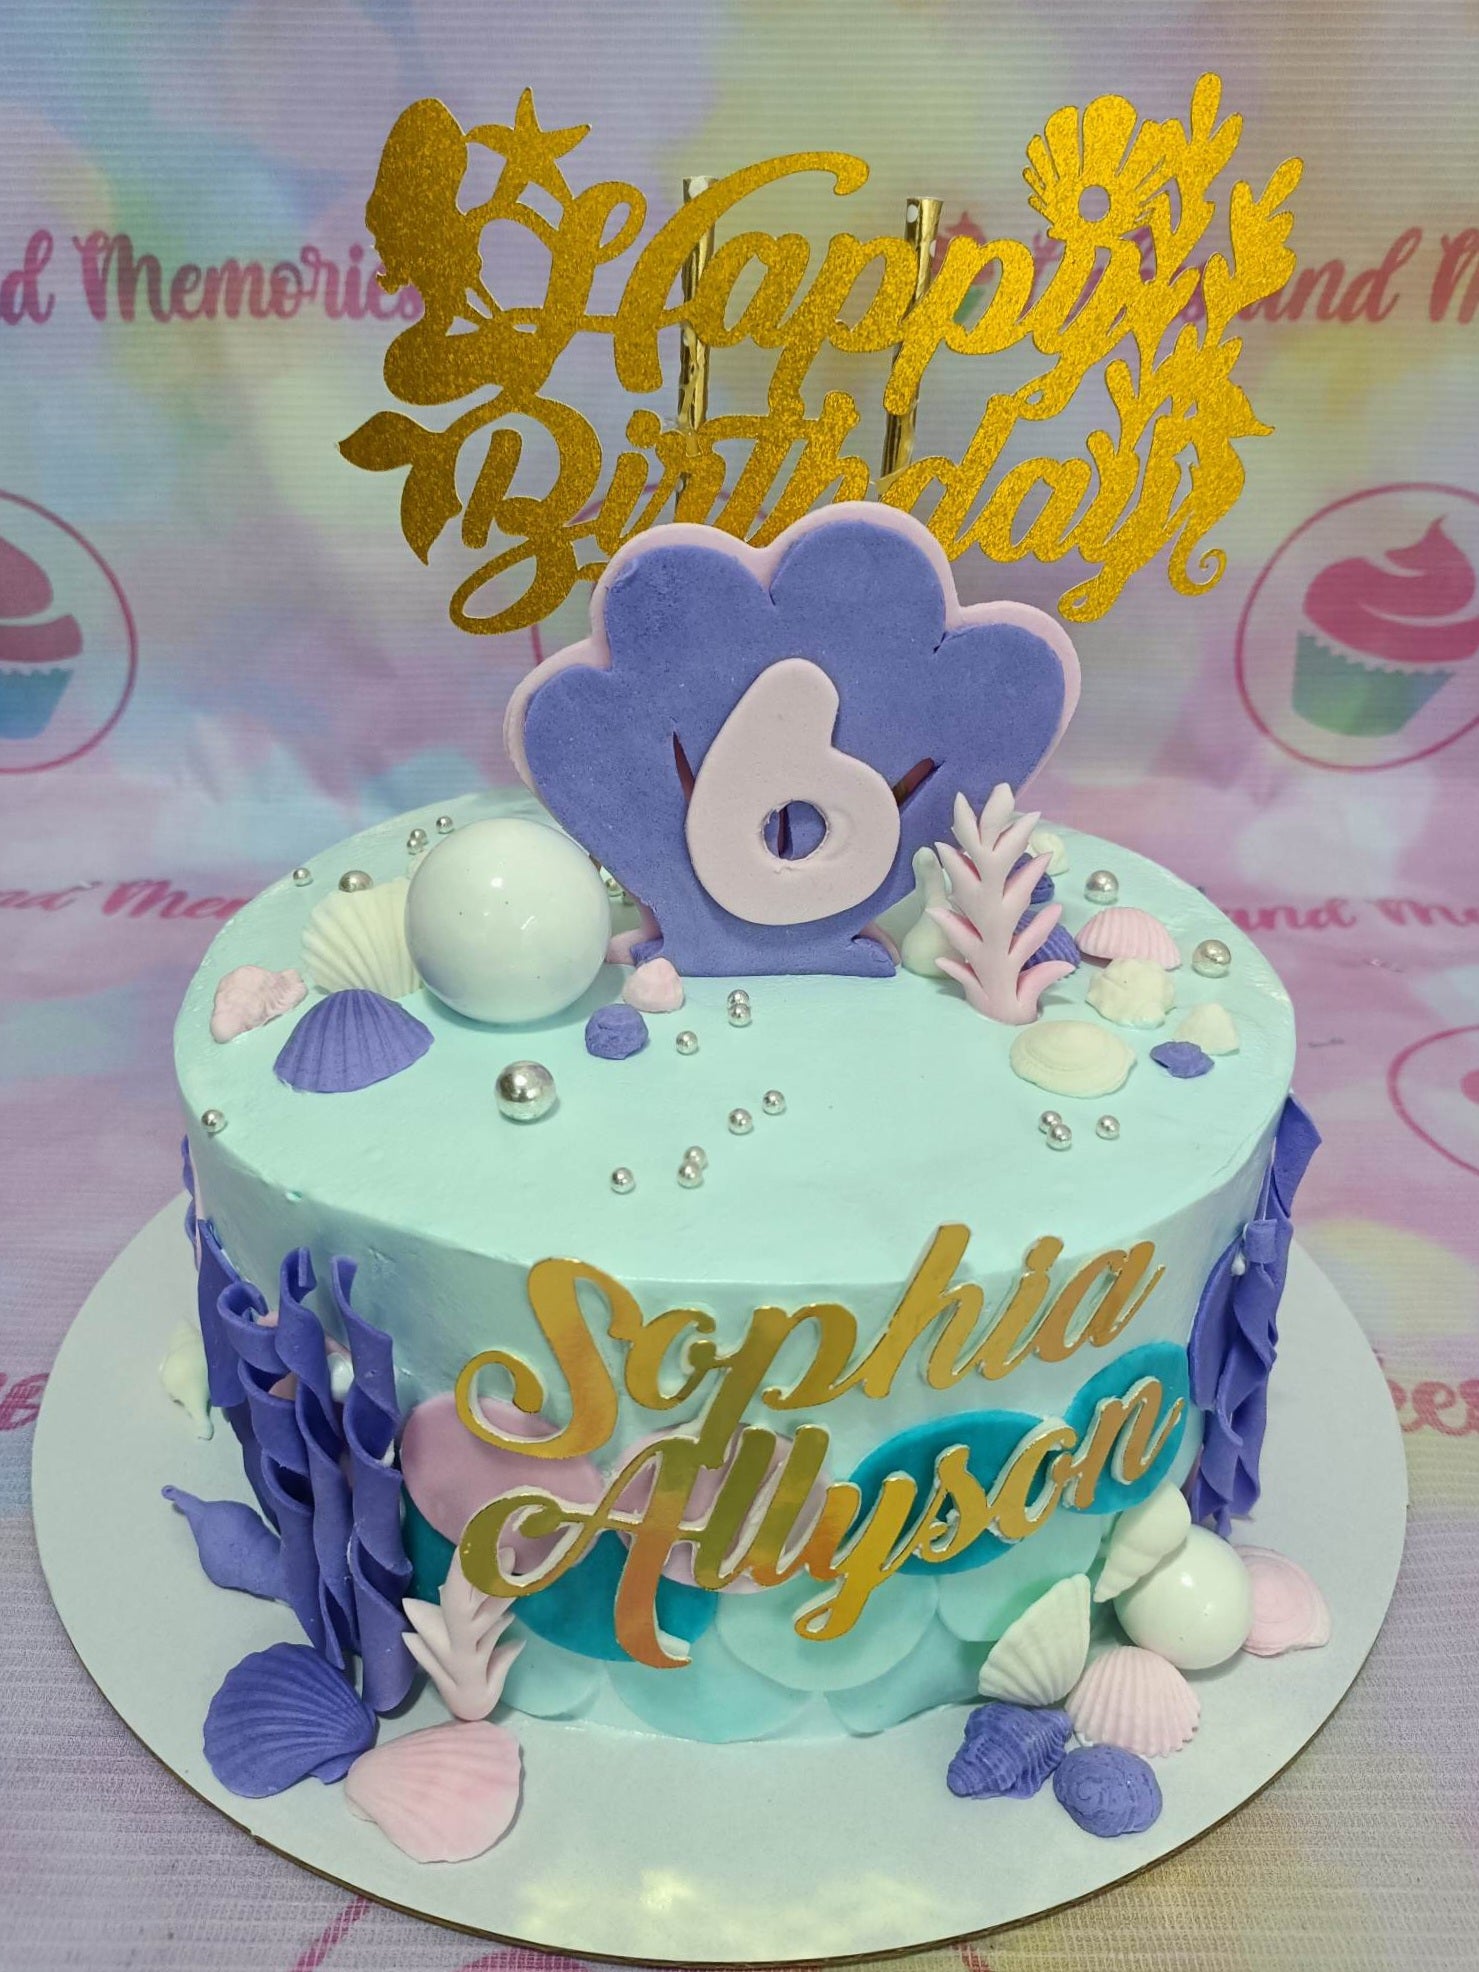 This beautiful Under the Sea Cake is perfect for any birthday celebration! It is decorated with blue, purple, and gold seashells, a mermaid and gold money coins, making the cake look like a treasure chest. It is perfect for children, and can be customized to any age or gender. It is especially popular with little mermaid fans!